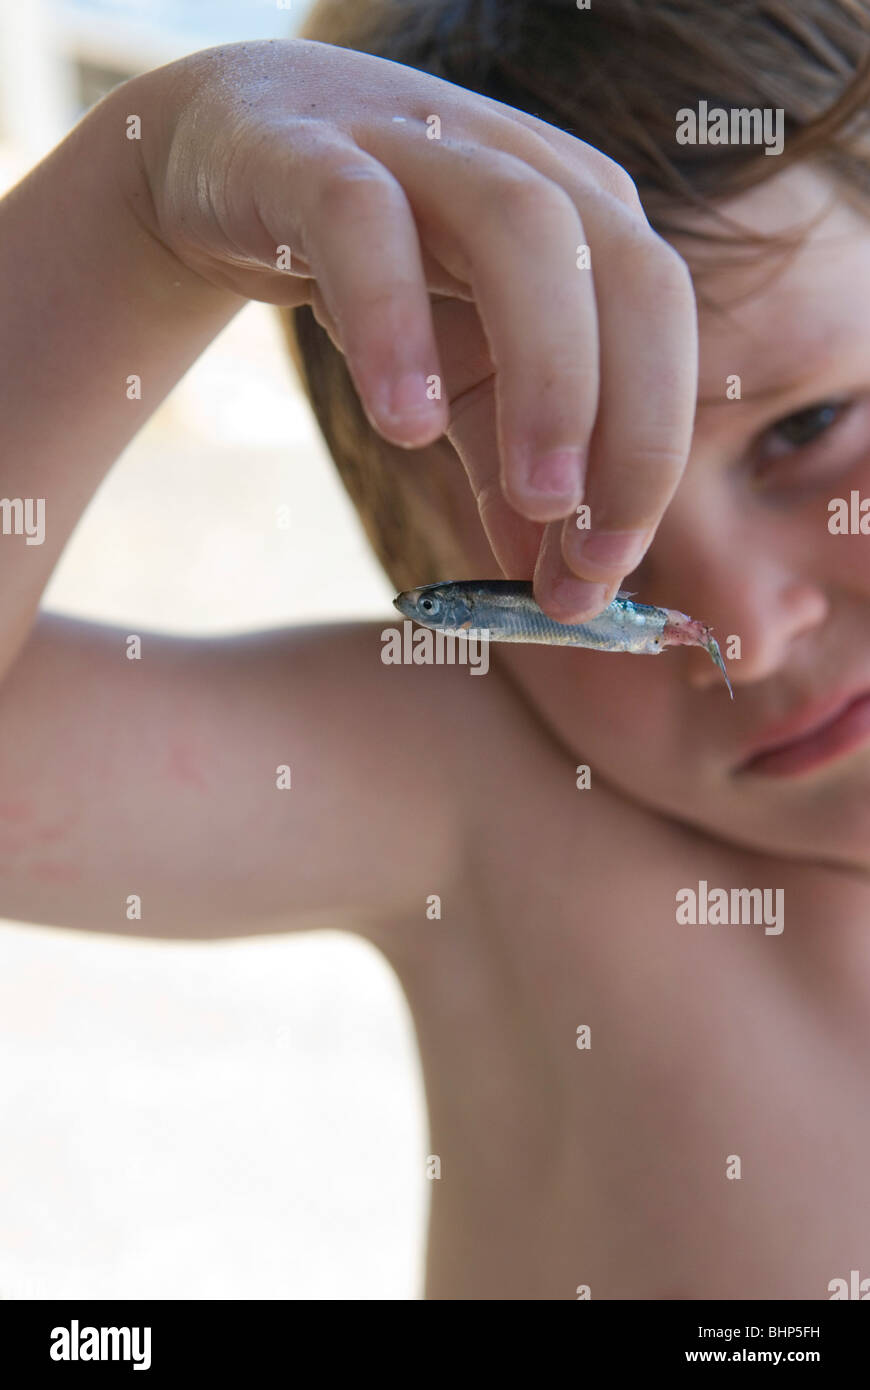 7 year old young boy bemoans the death of small fish by holding it up to camera Stock Photo